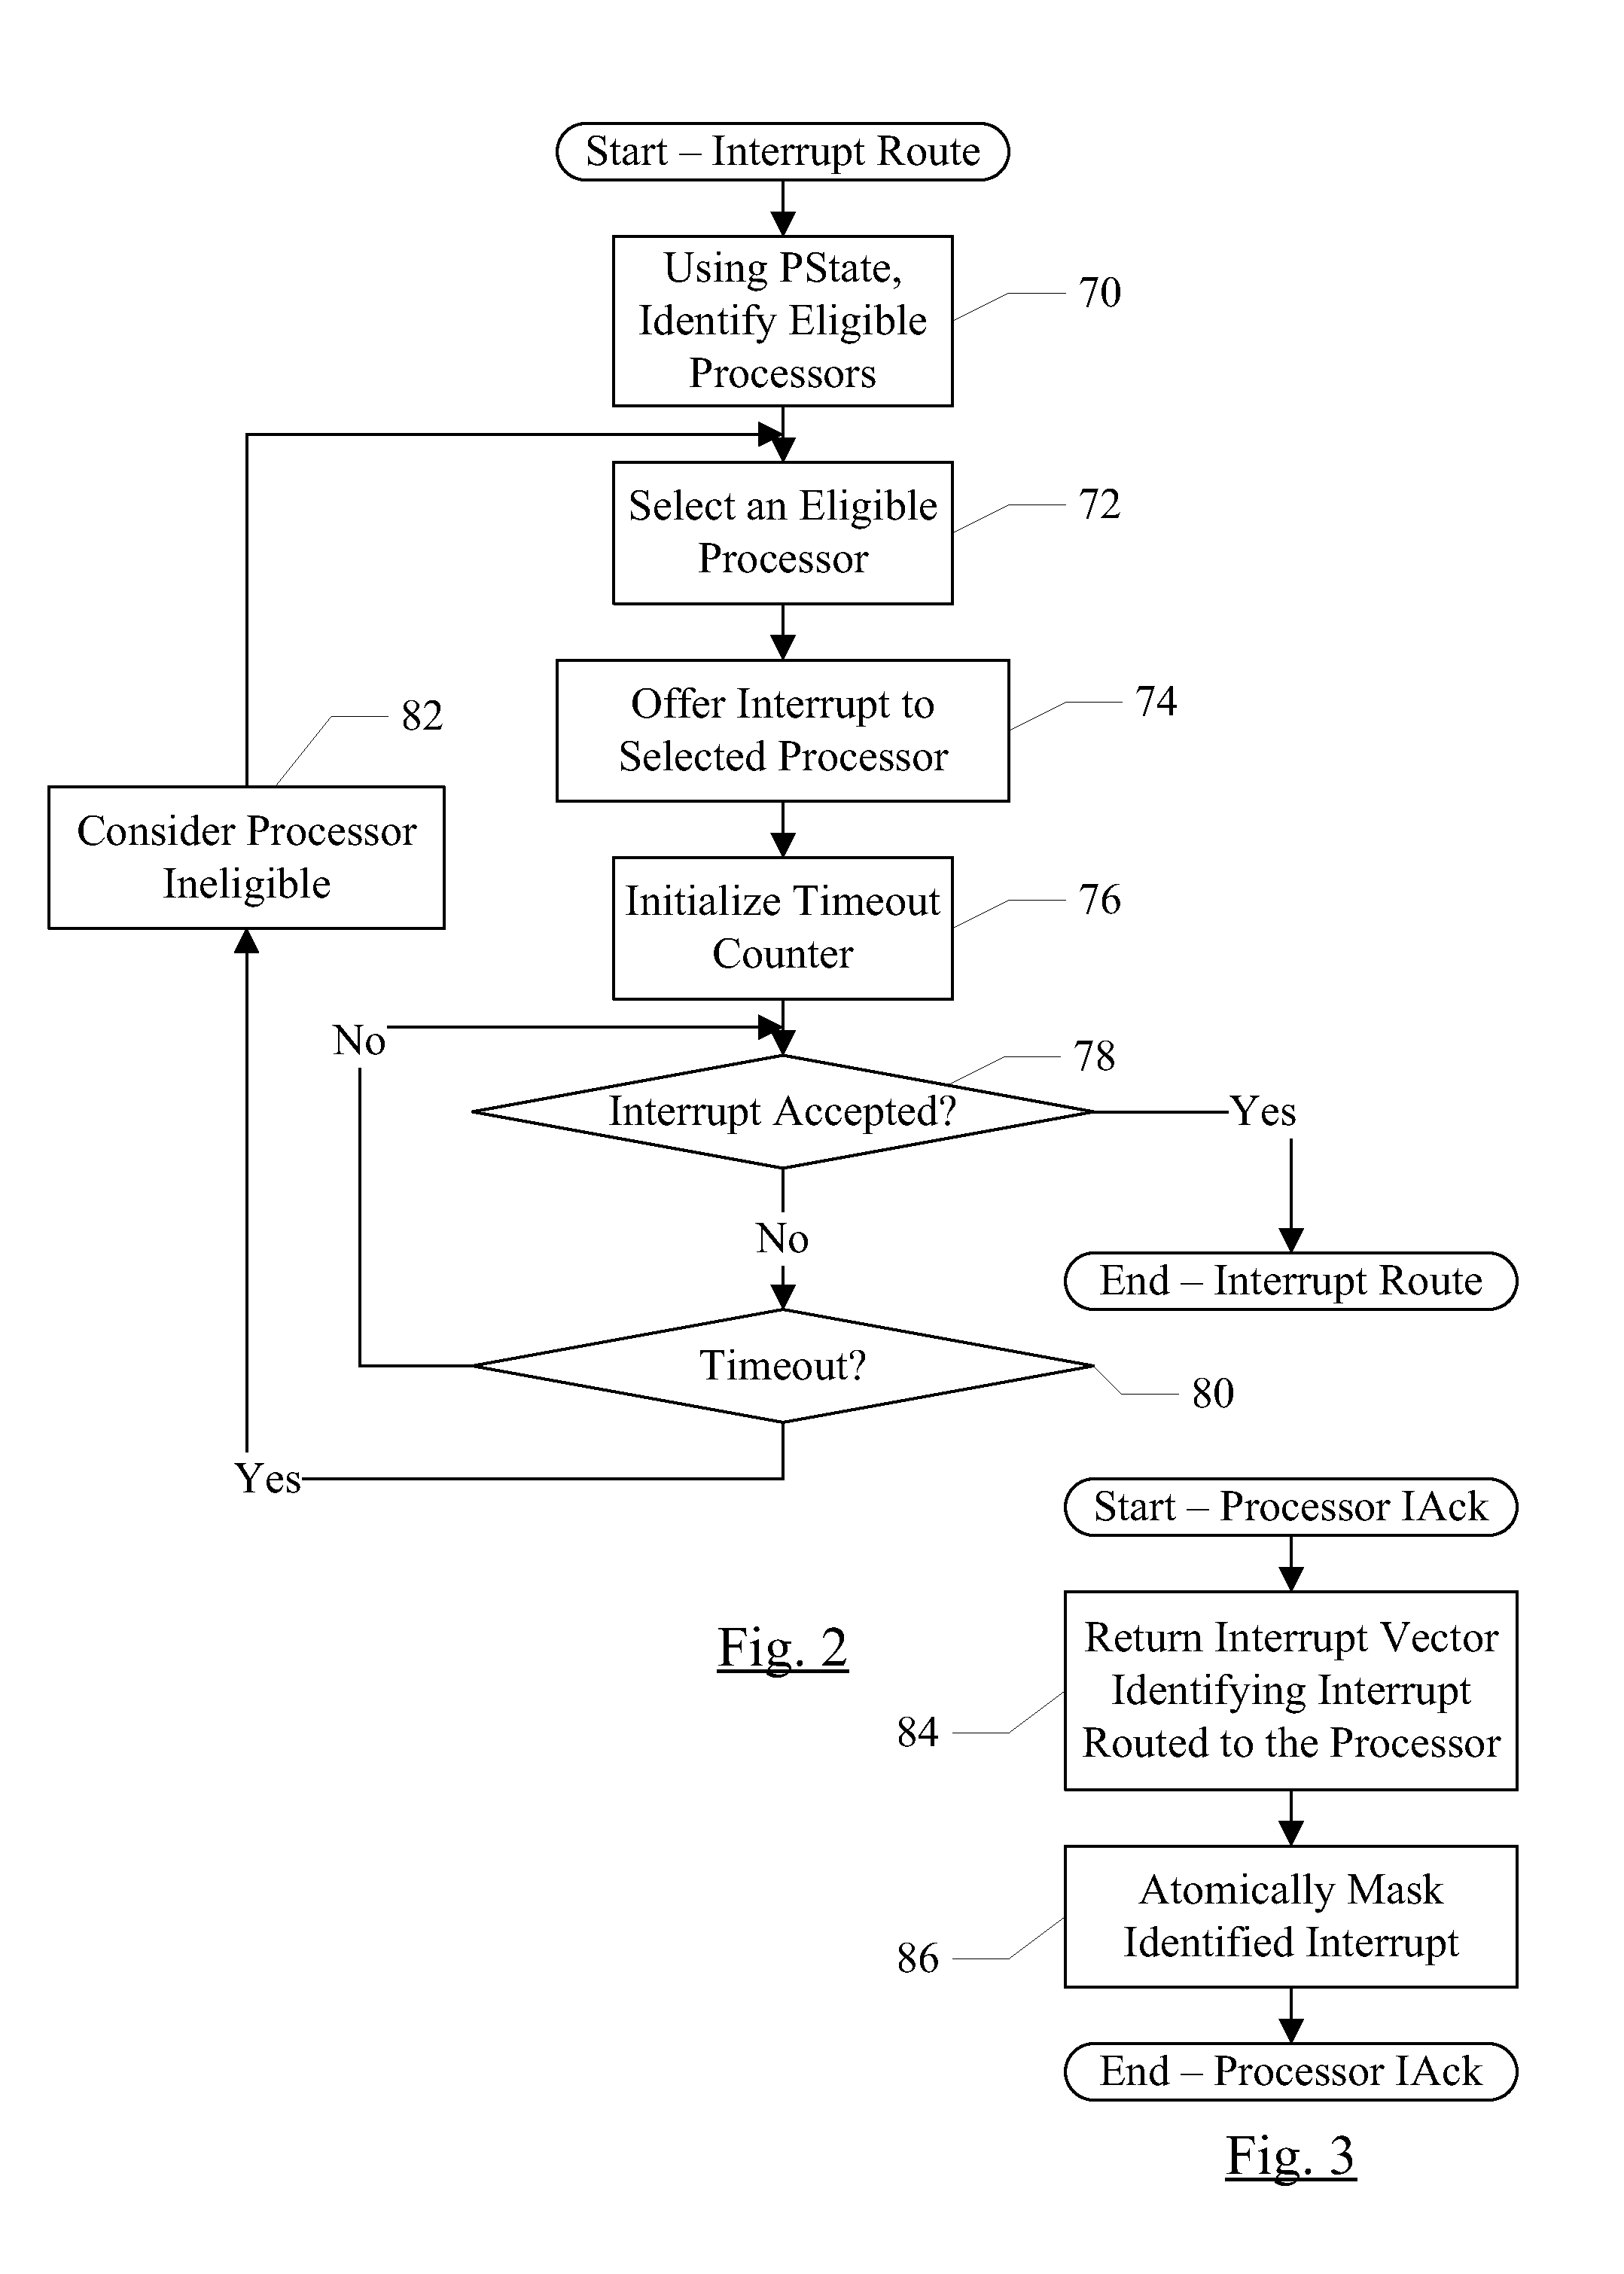 Atomic interrupt masking in an interrupt controller to prevent delivery of same interrupt vector for consecutive interrupt acknowledgements